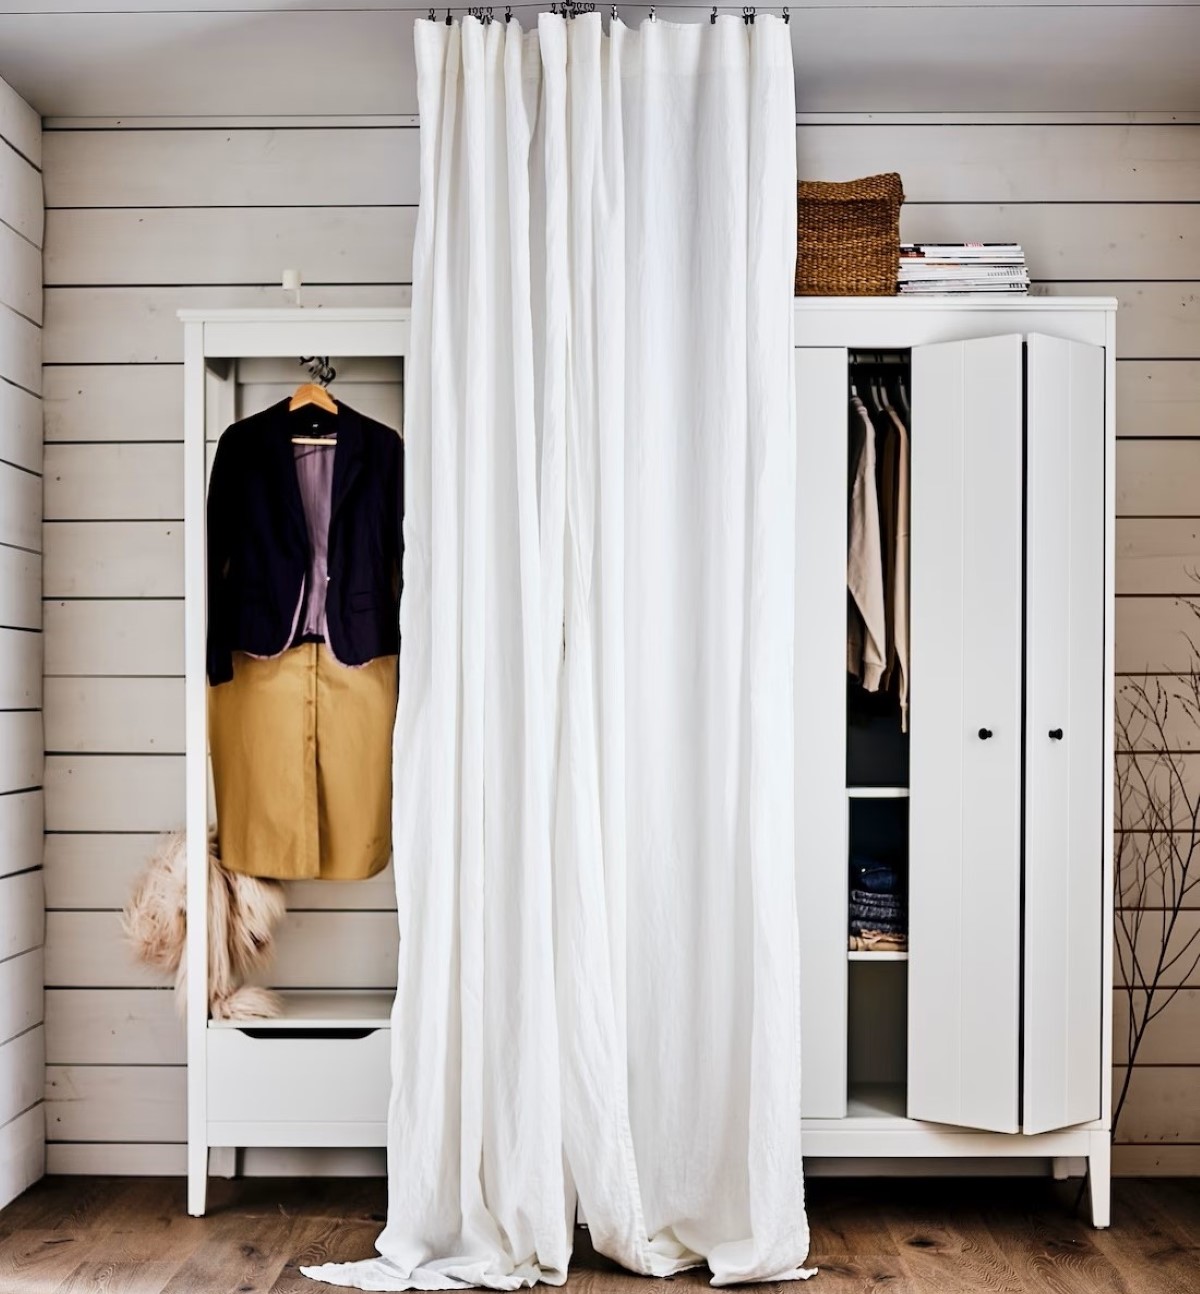 Curtain used to cover closet